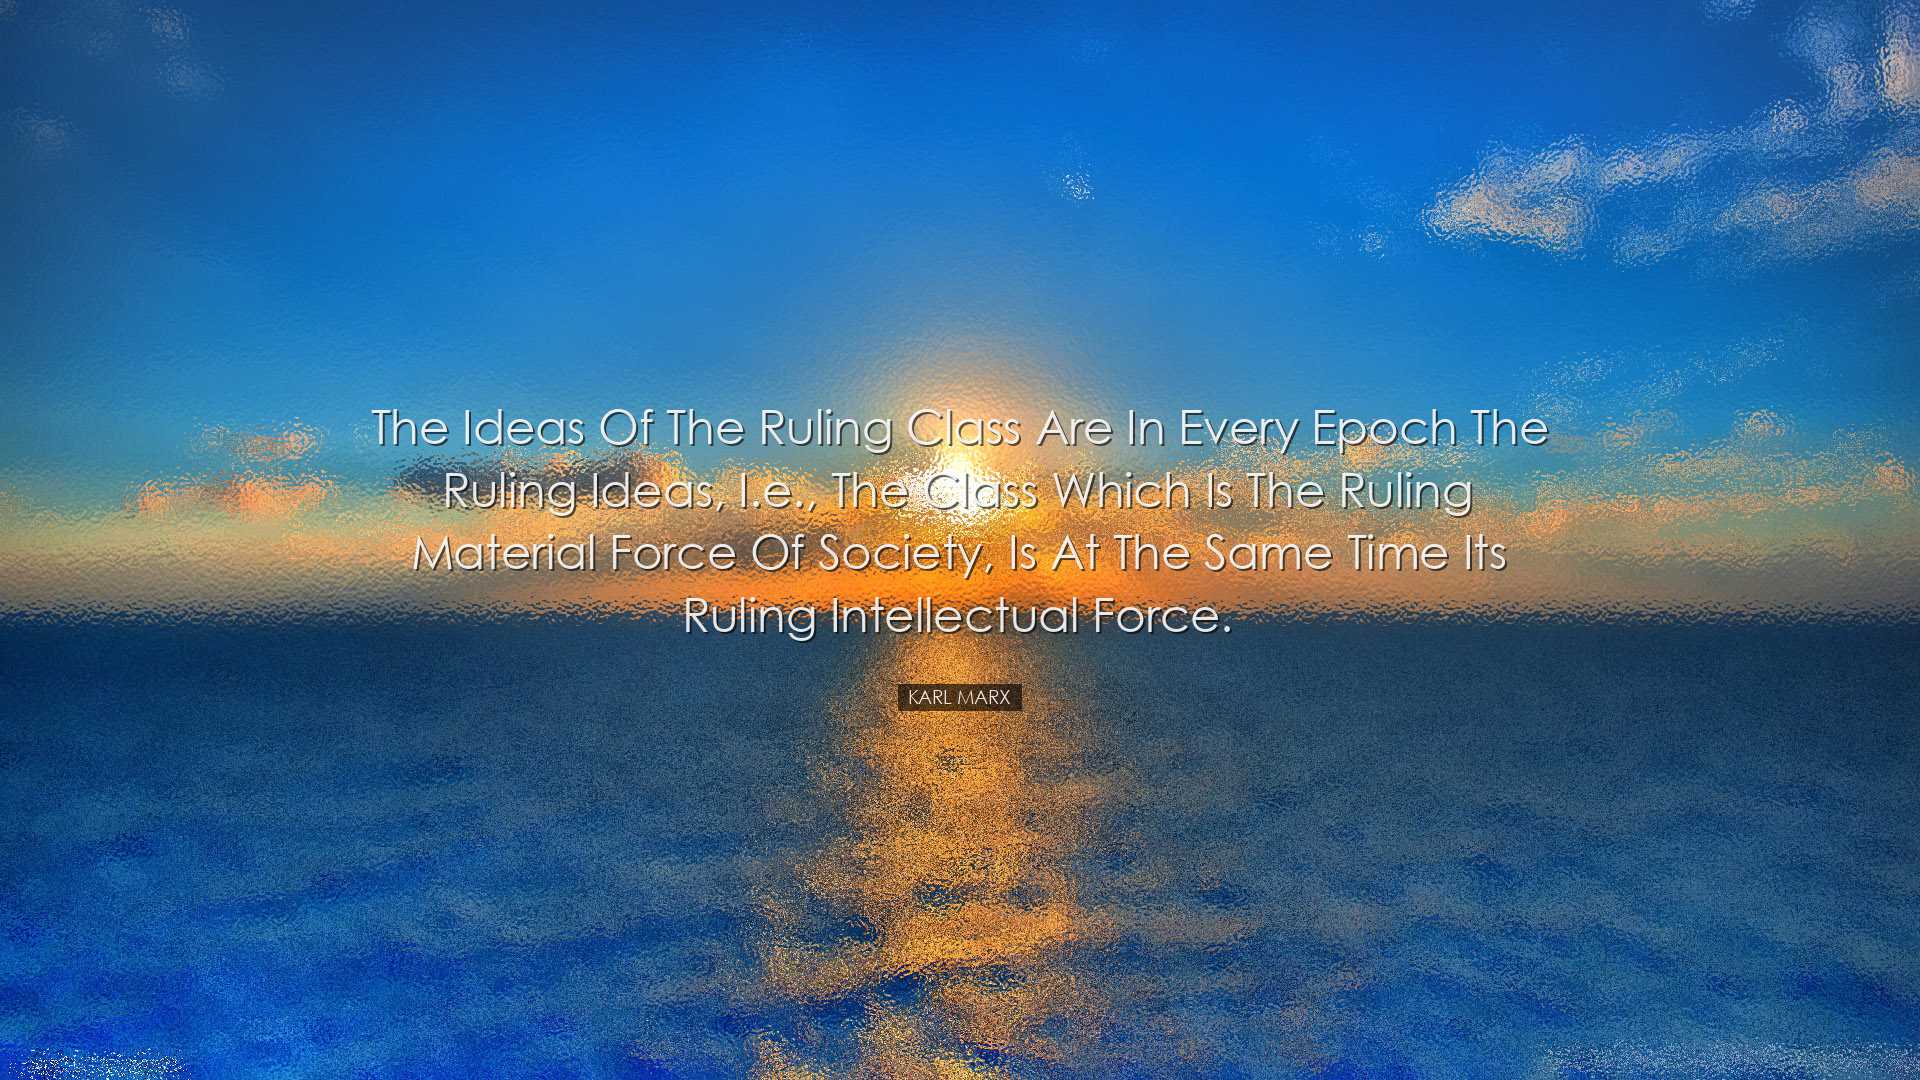 The ideas of the ruling class are in every epoch the ruling ideas,